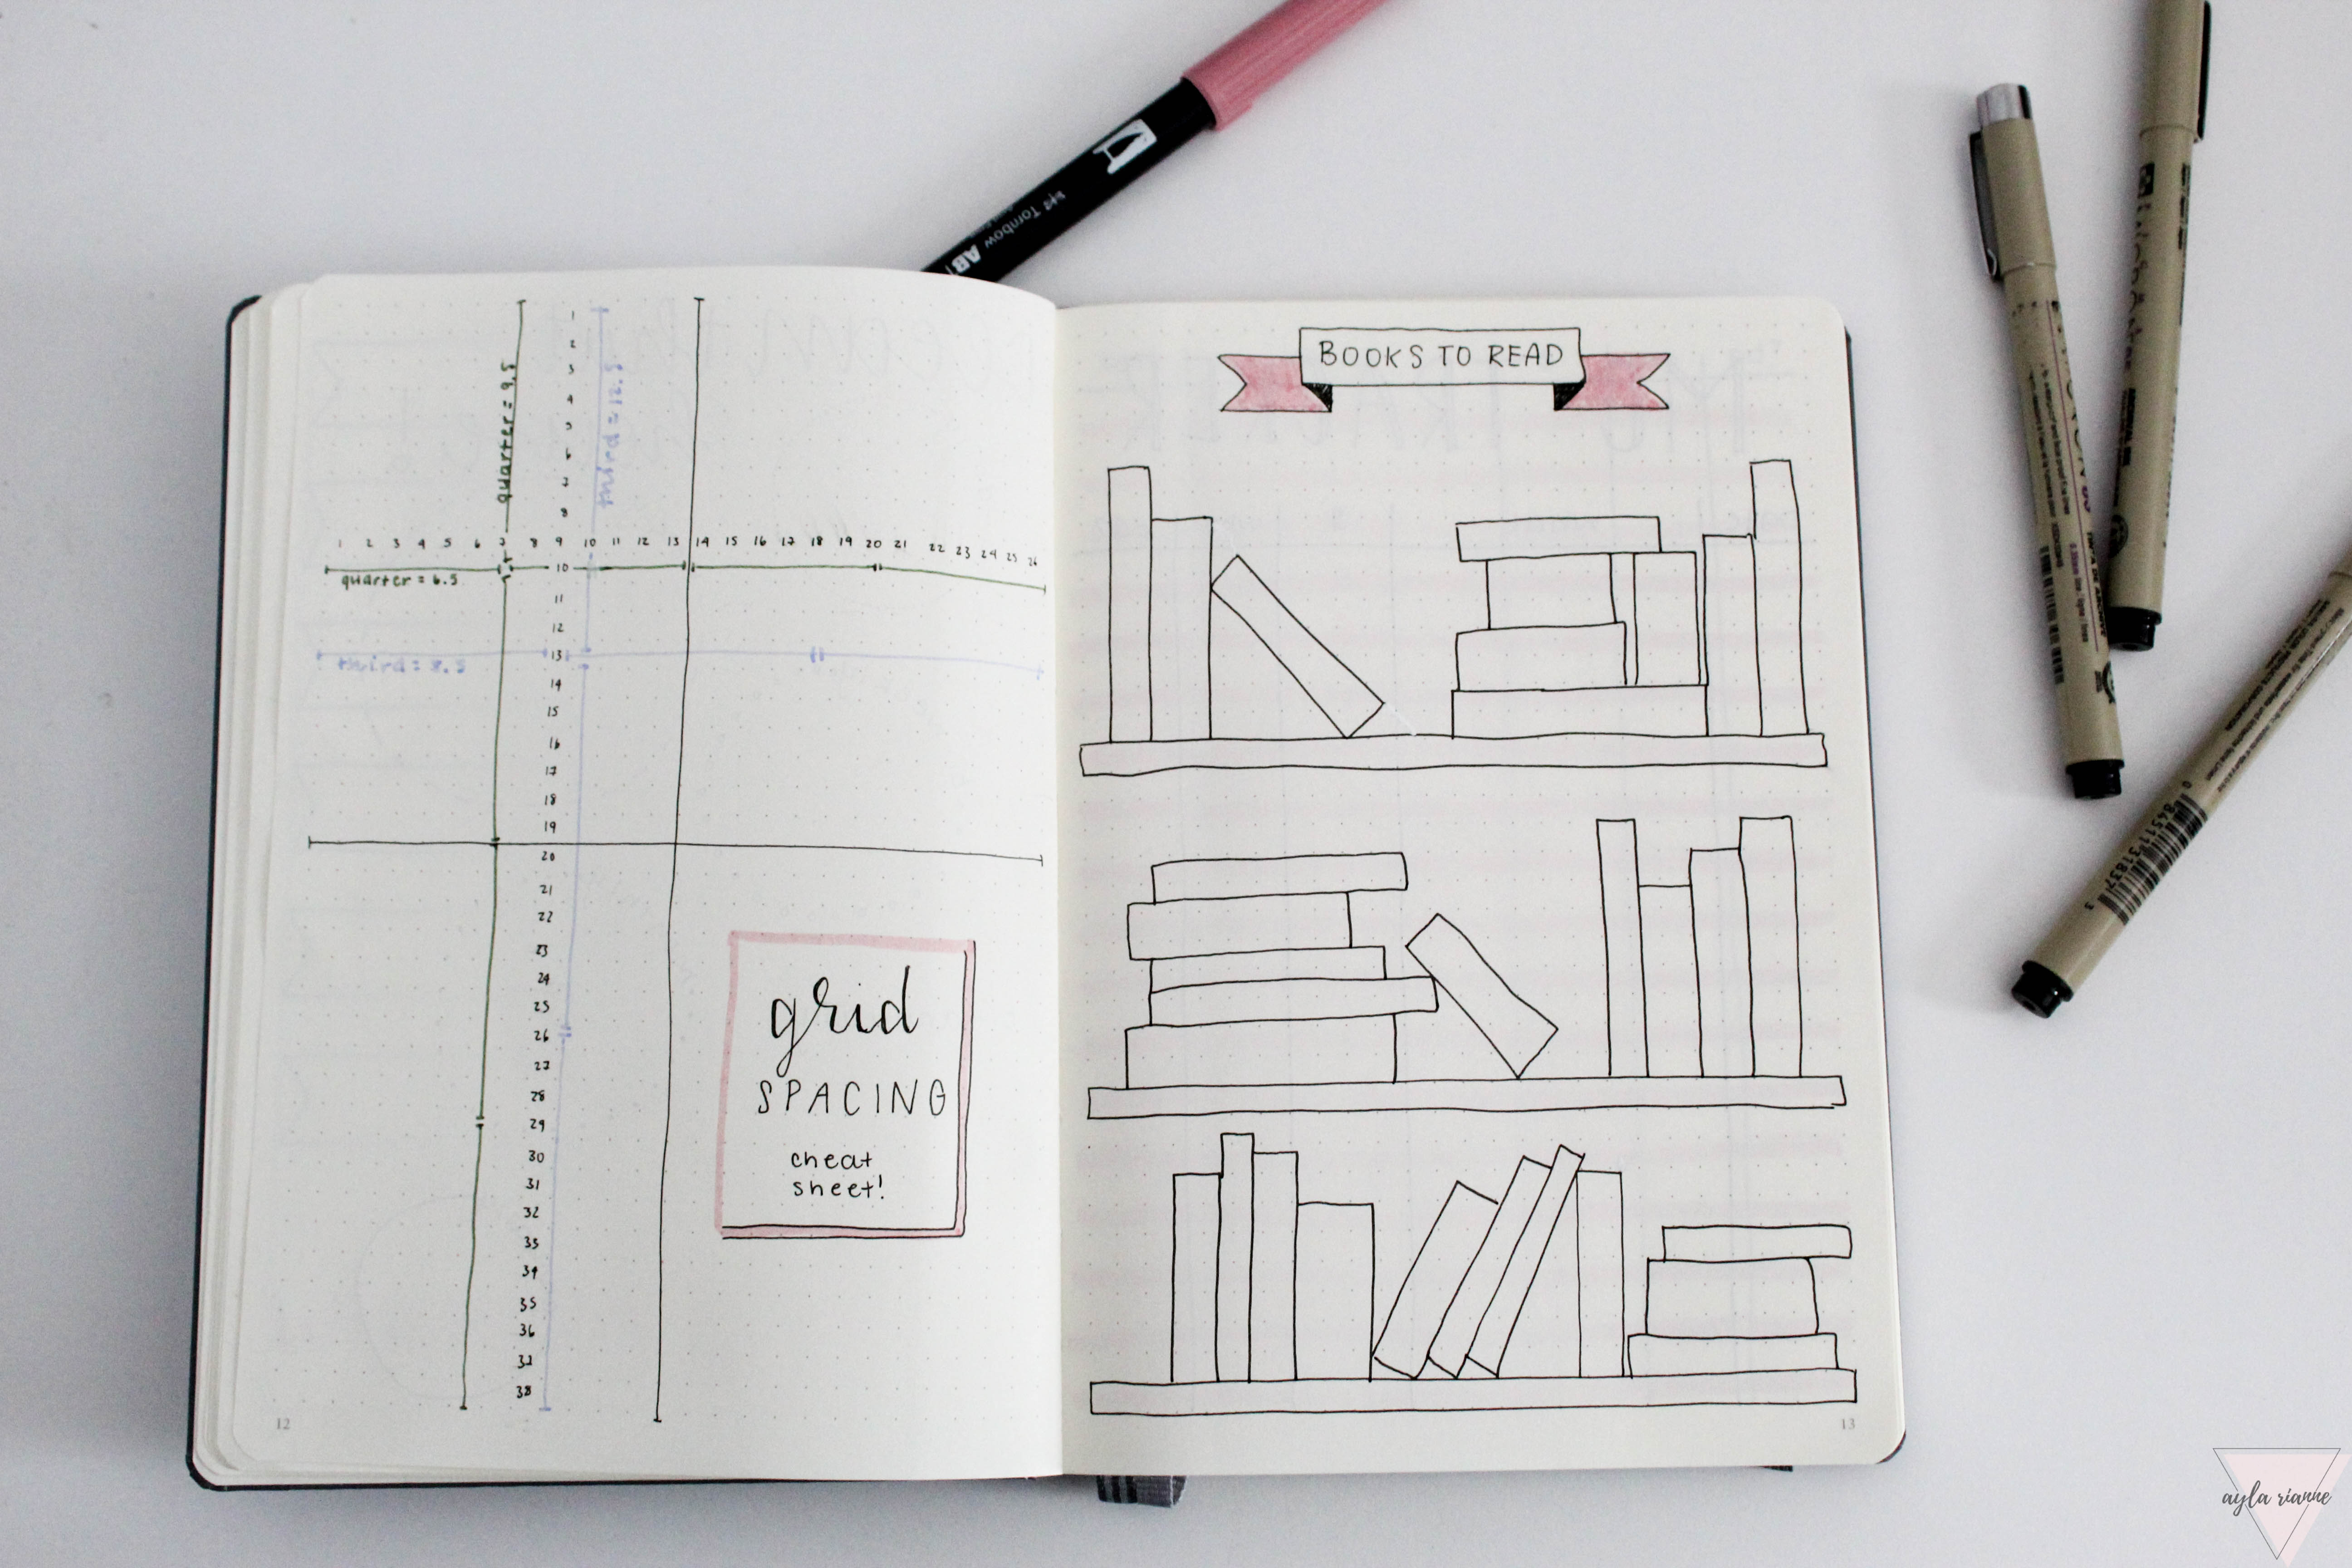 Grid Spacing for a Bullet Journal and a Books to Read collection #aylarianne #bulletjournal #gridspacing #bookstoread